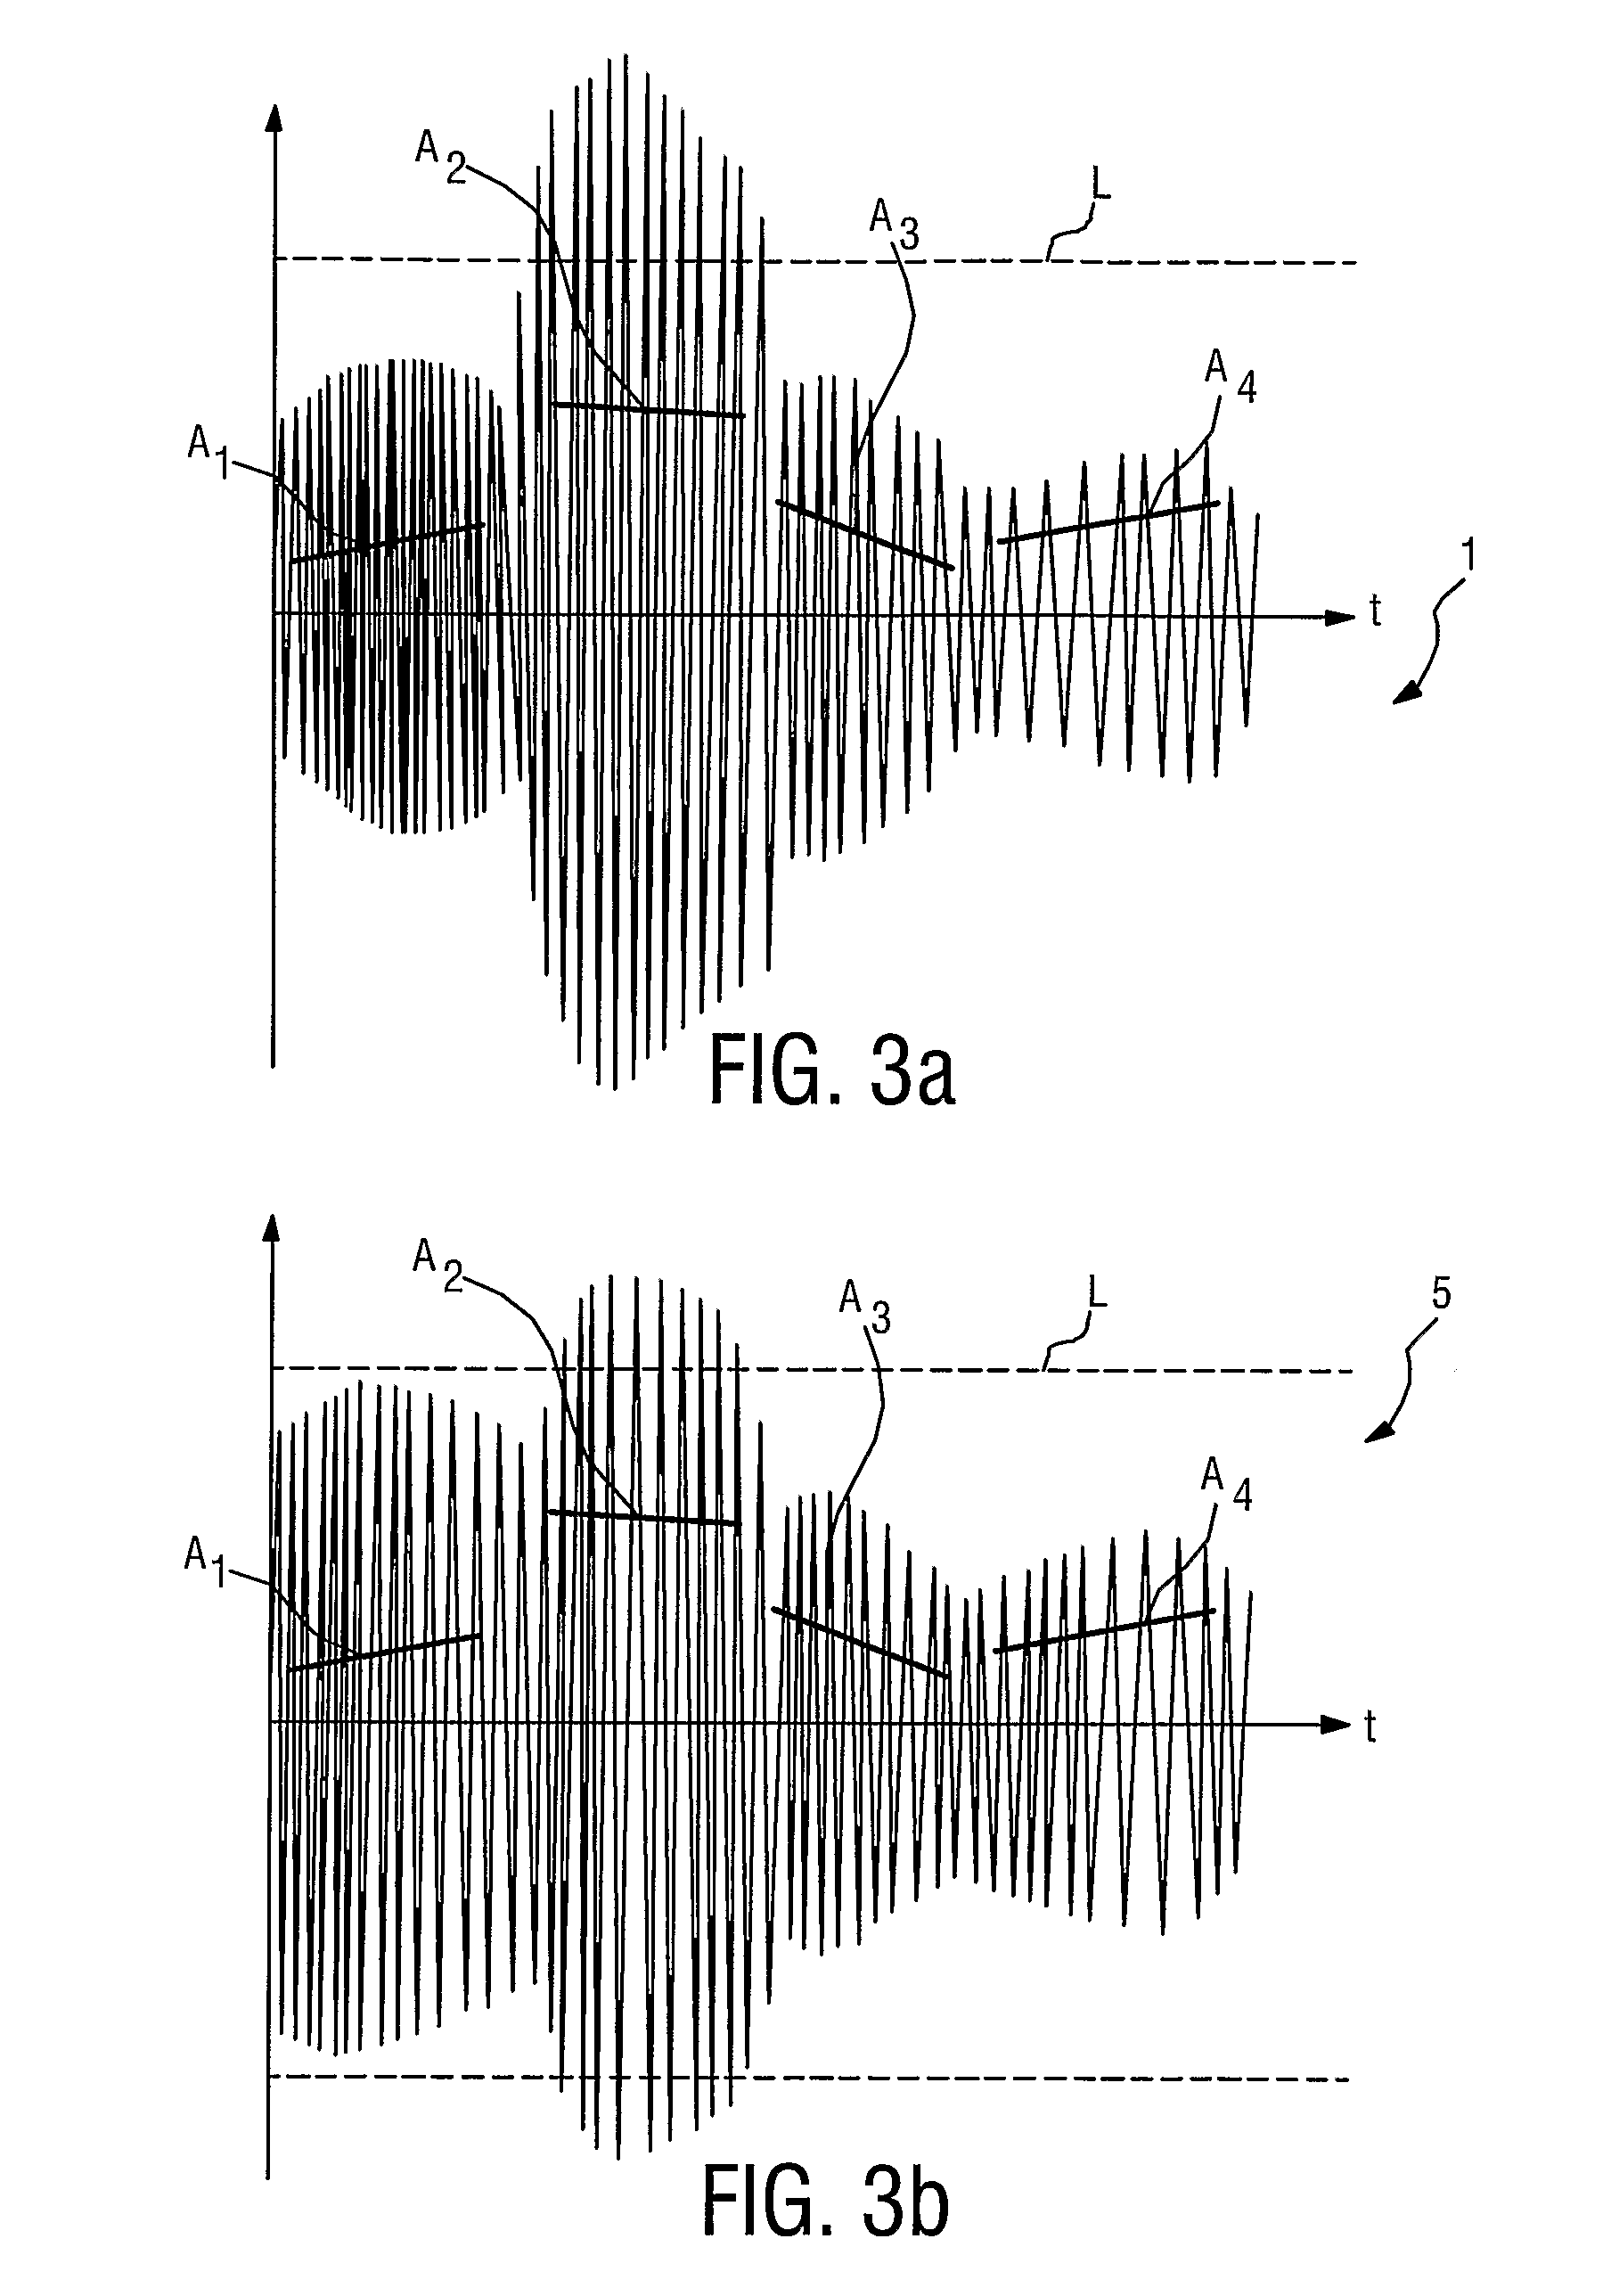 Method of and System for Automatically Adjusting the Loudness of an Audio Signal